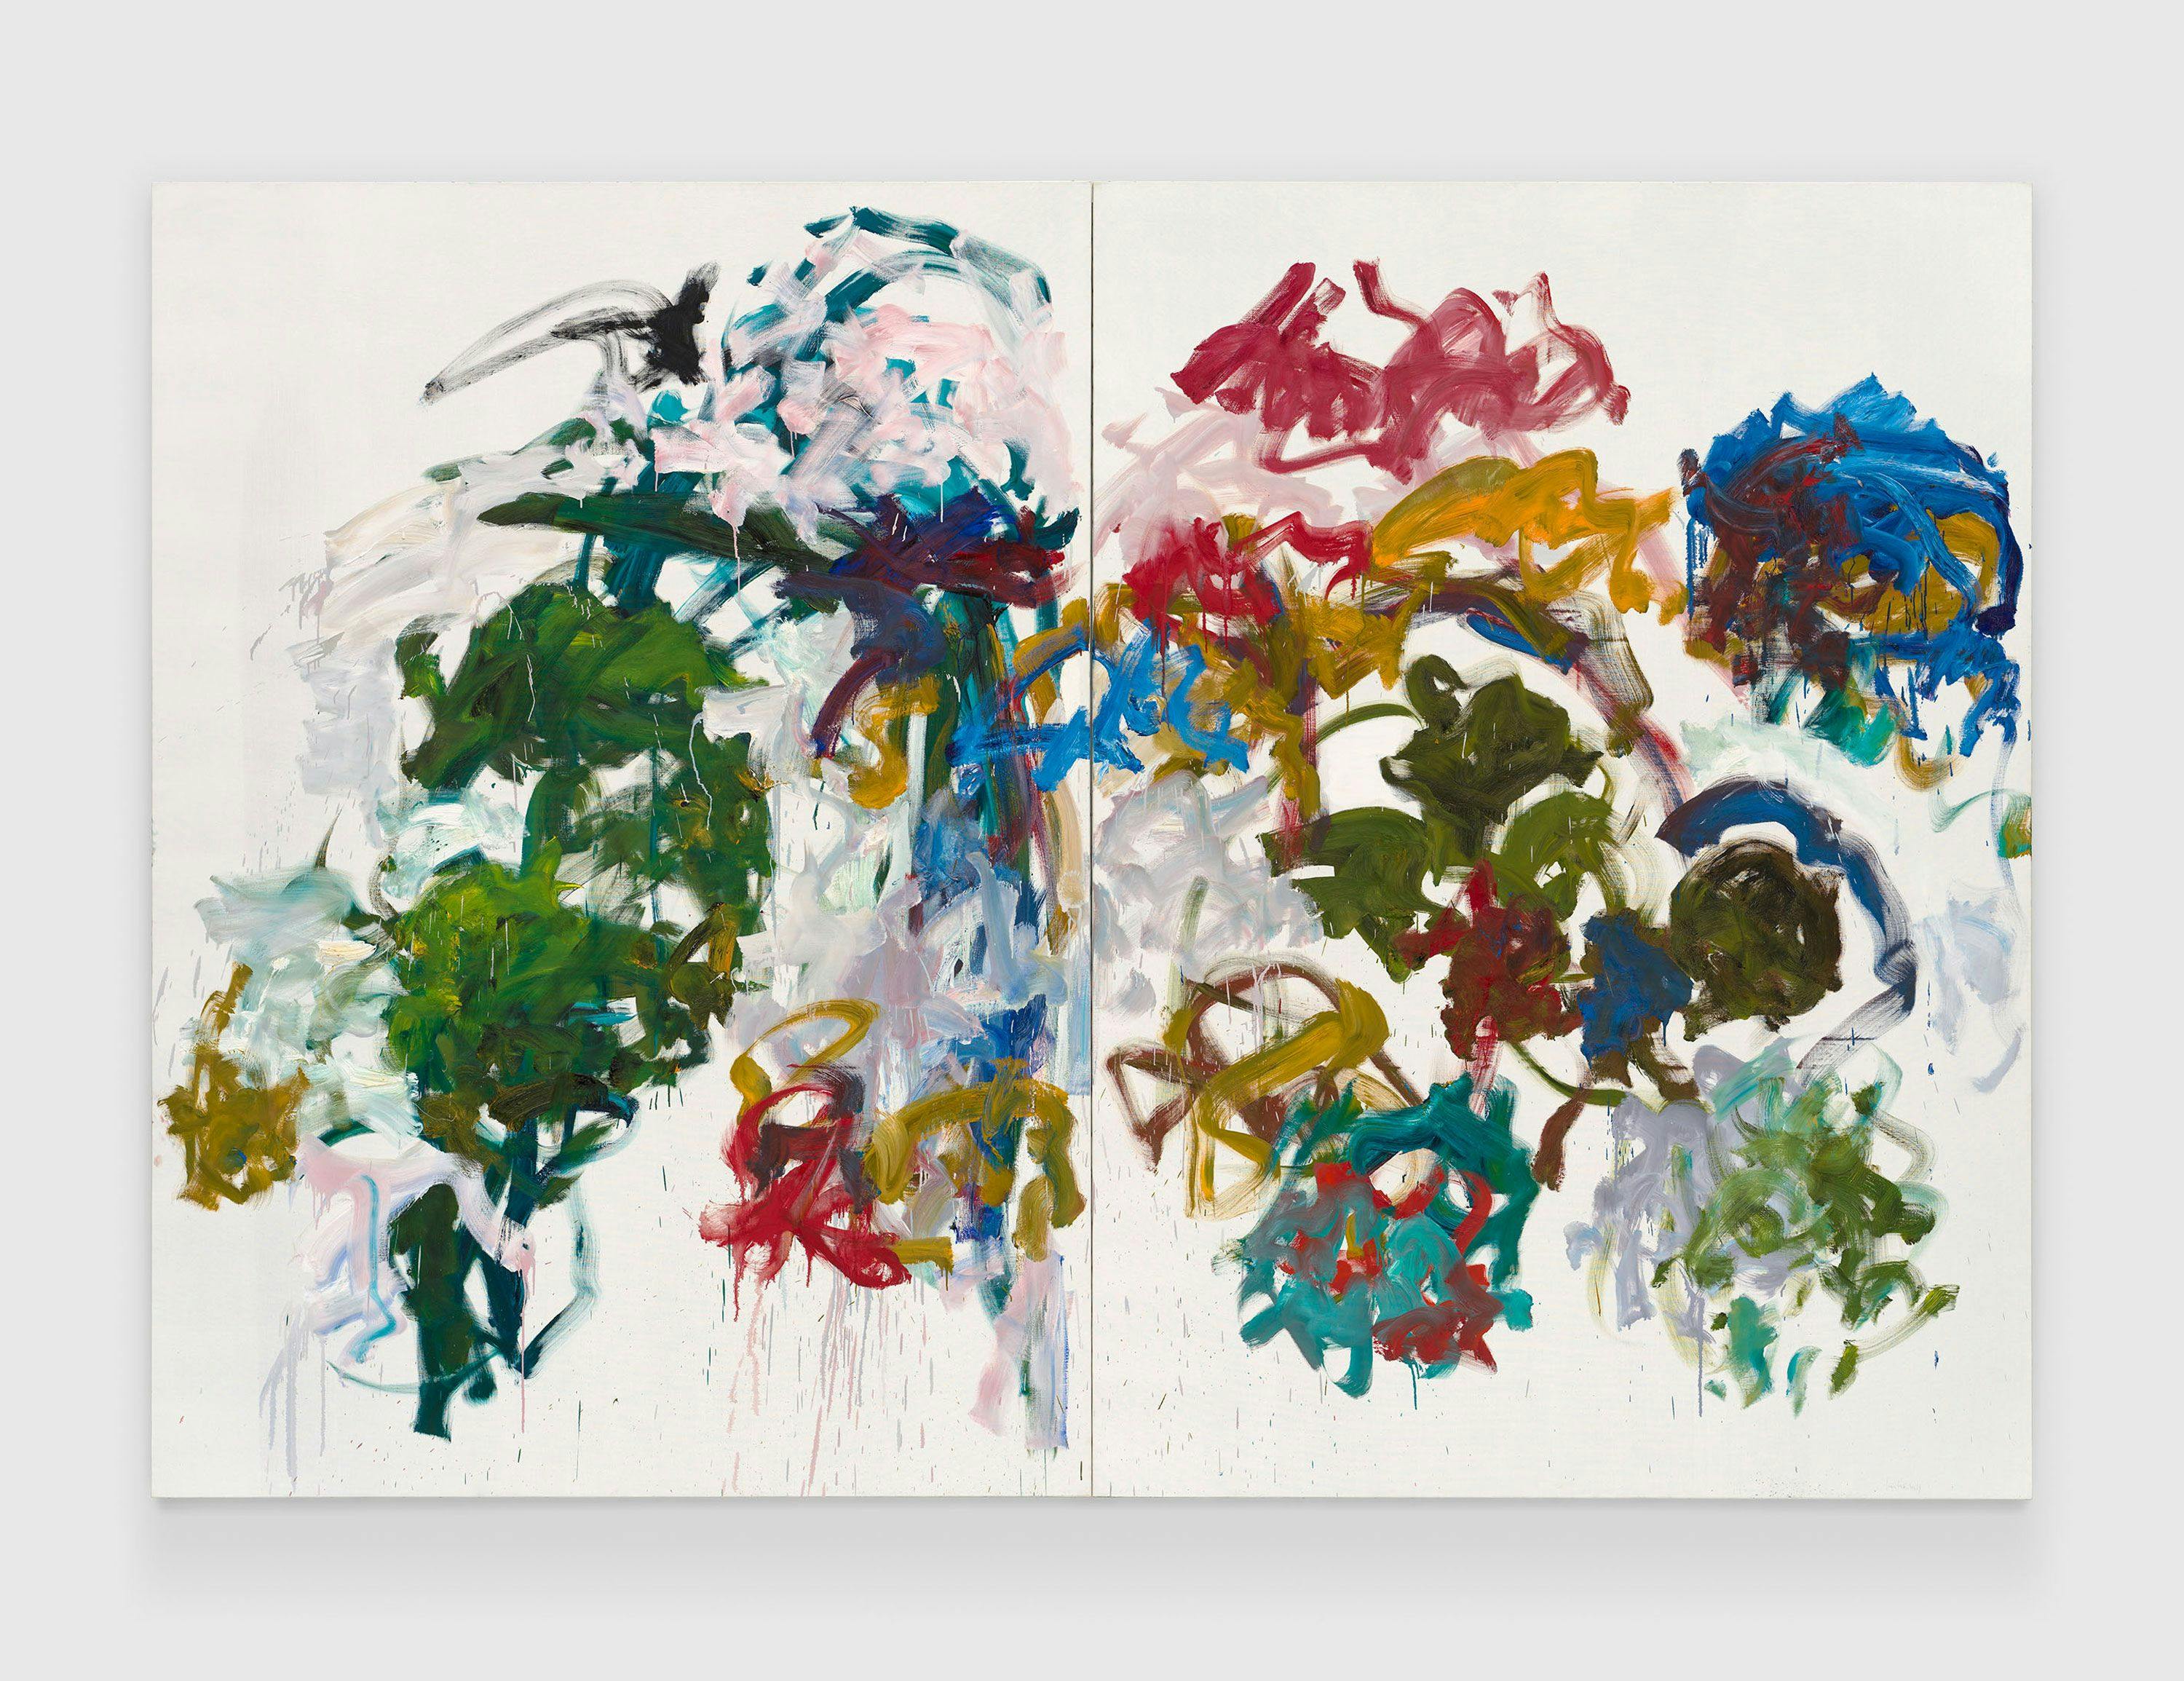 A painting by Joan Mitchell, titled Sunflowers, dated 1990 to 1991.